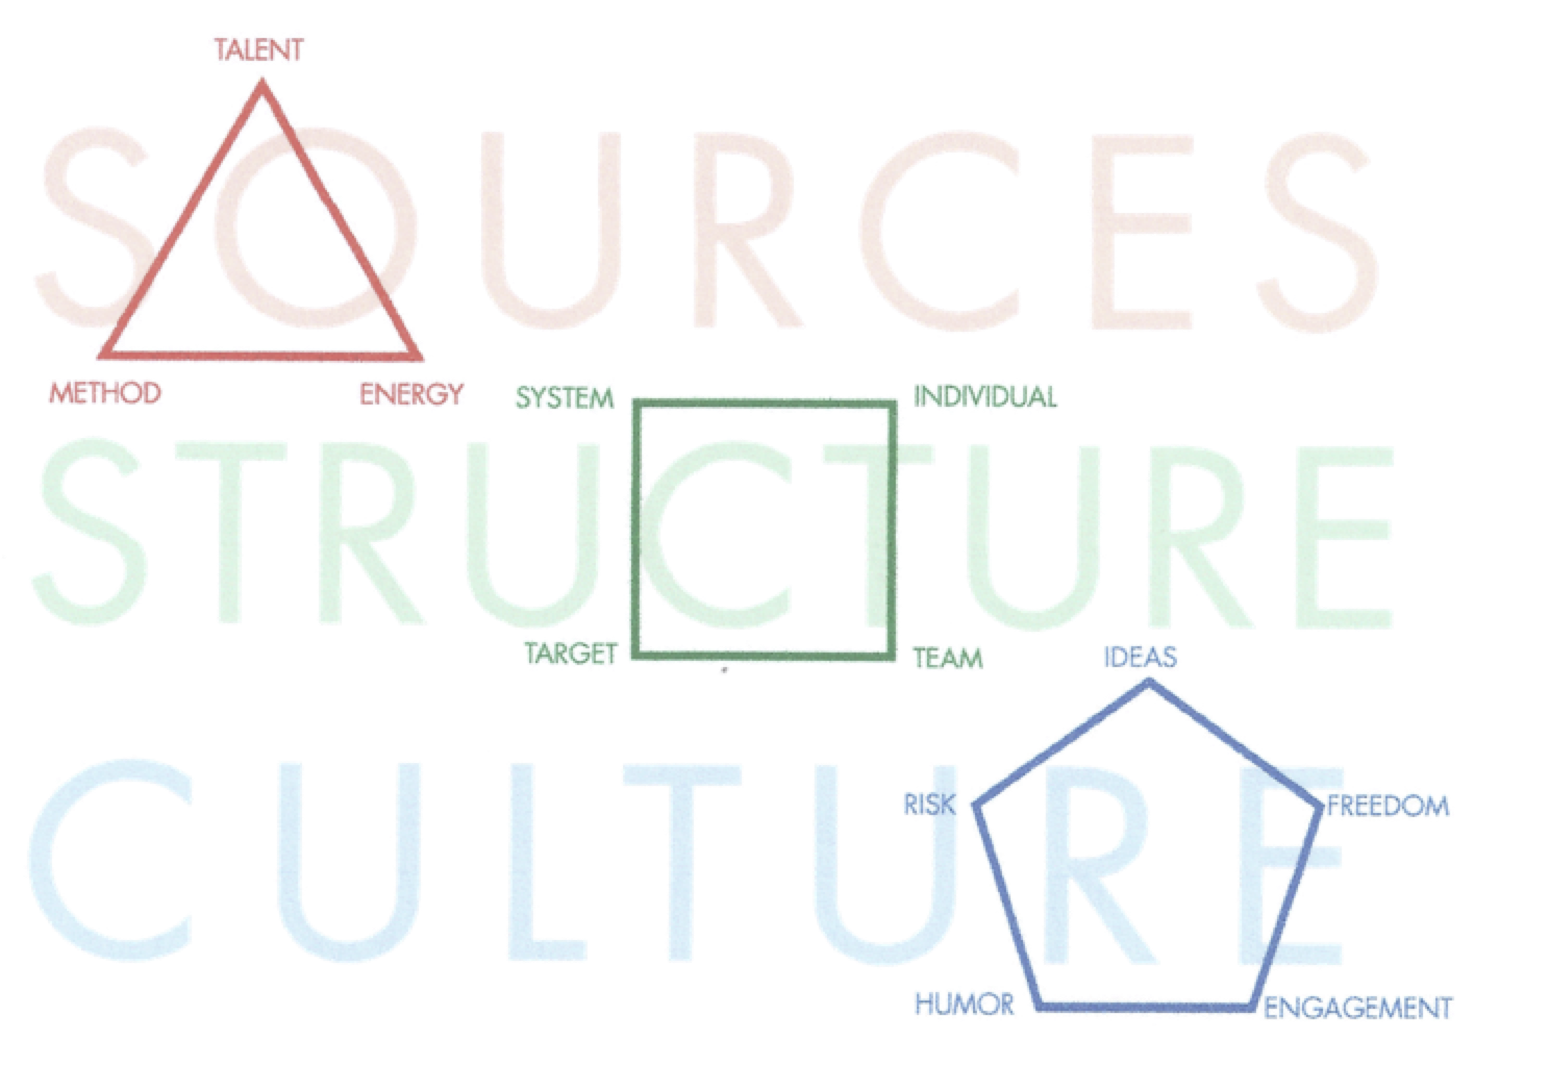 The Art of Innovation Structures Sources Culture